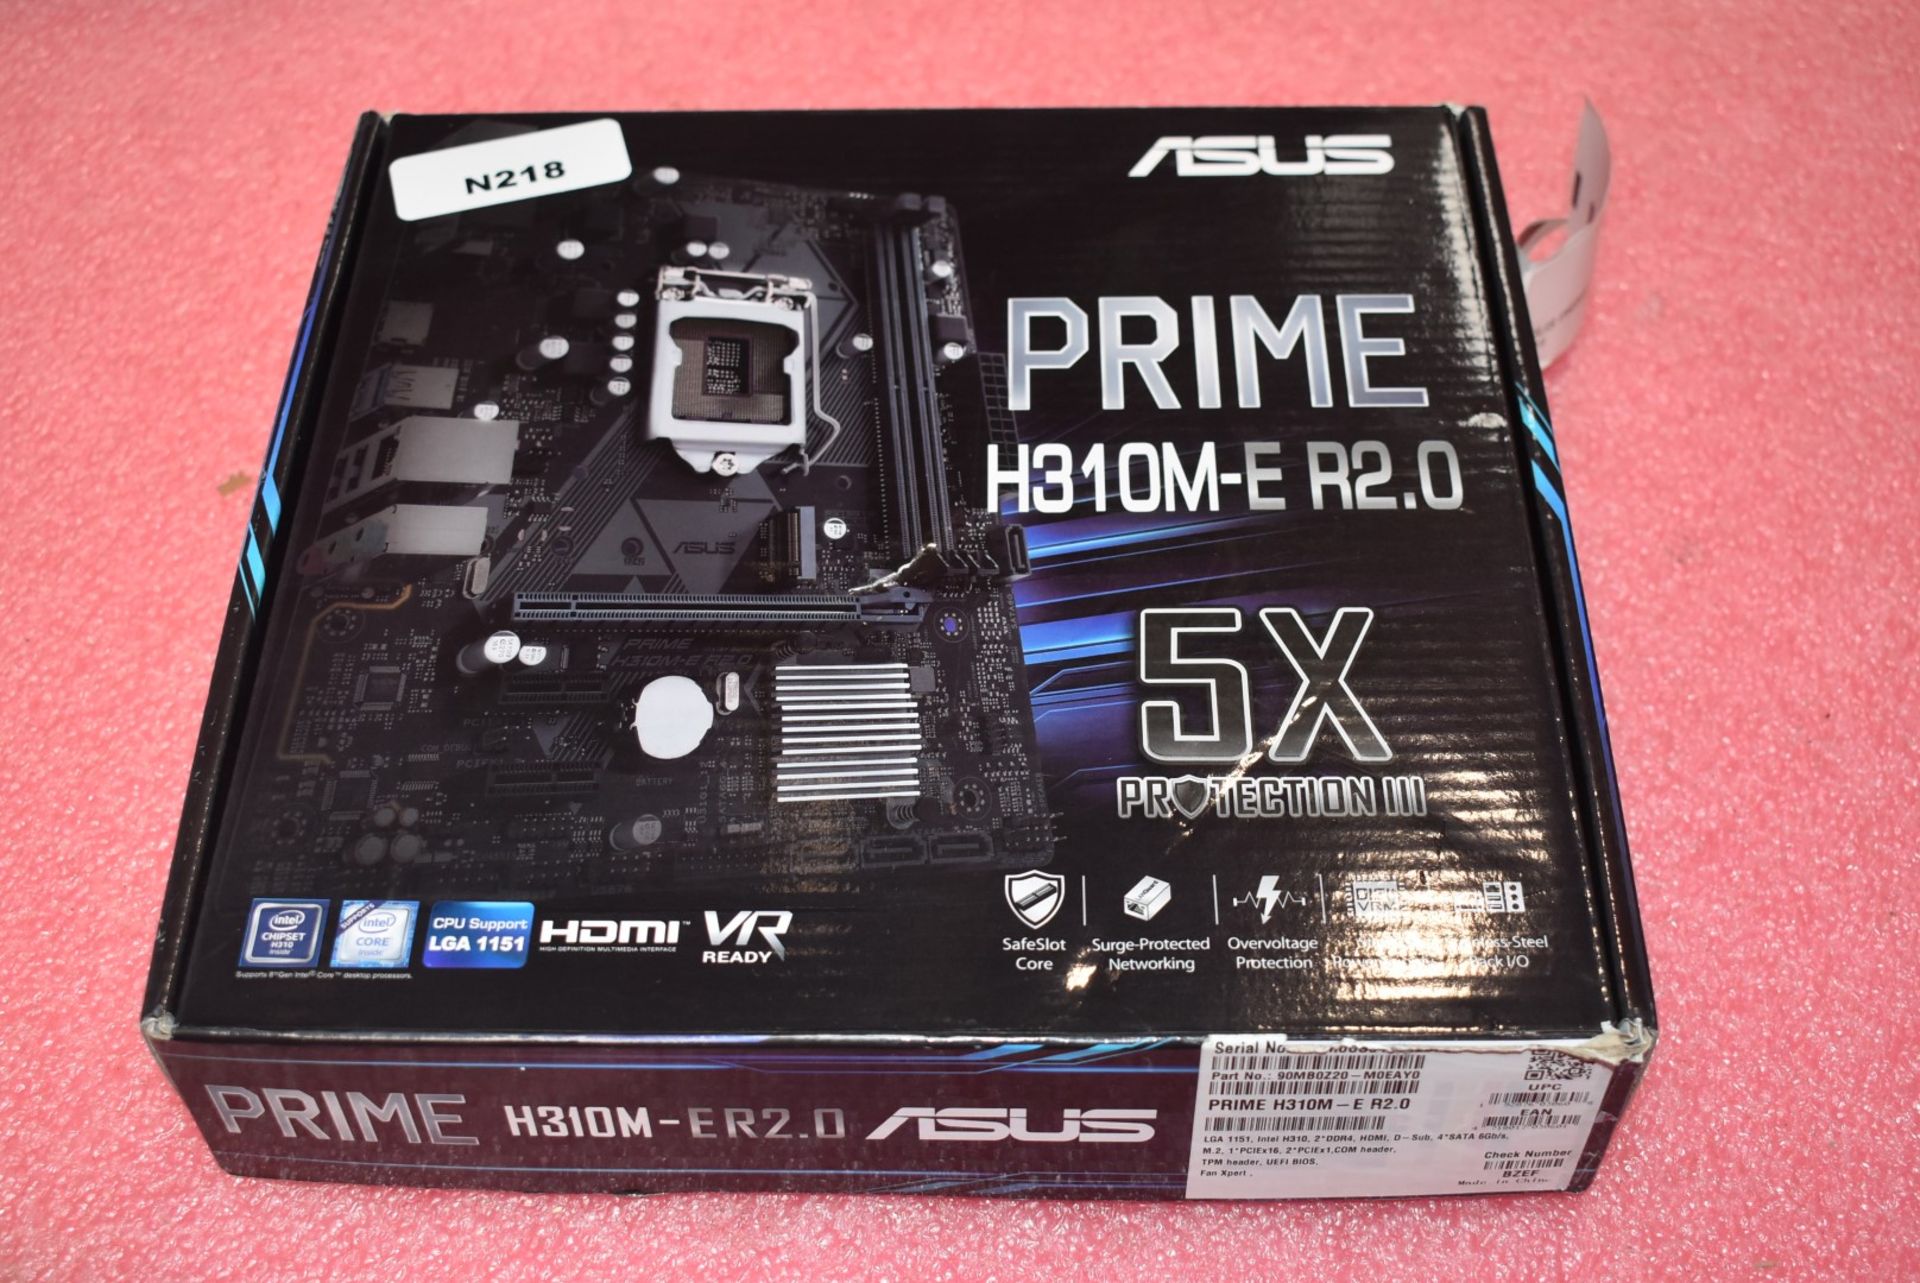 1 x Asus Prime H310M-E Intel LGA1151 Motherboard - Boxed With Accessories